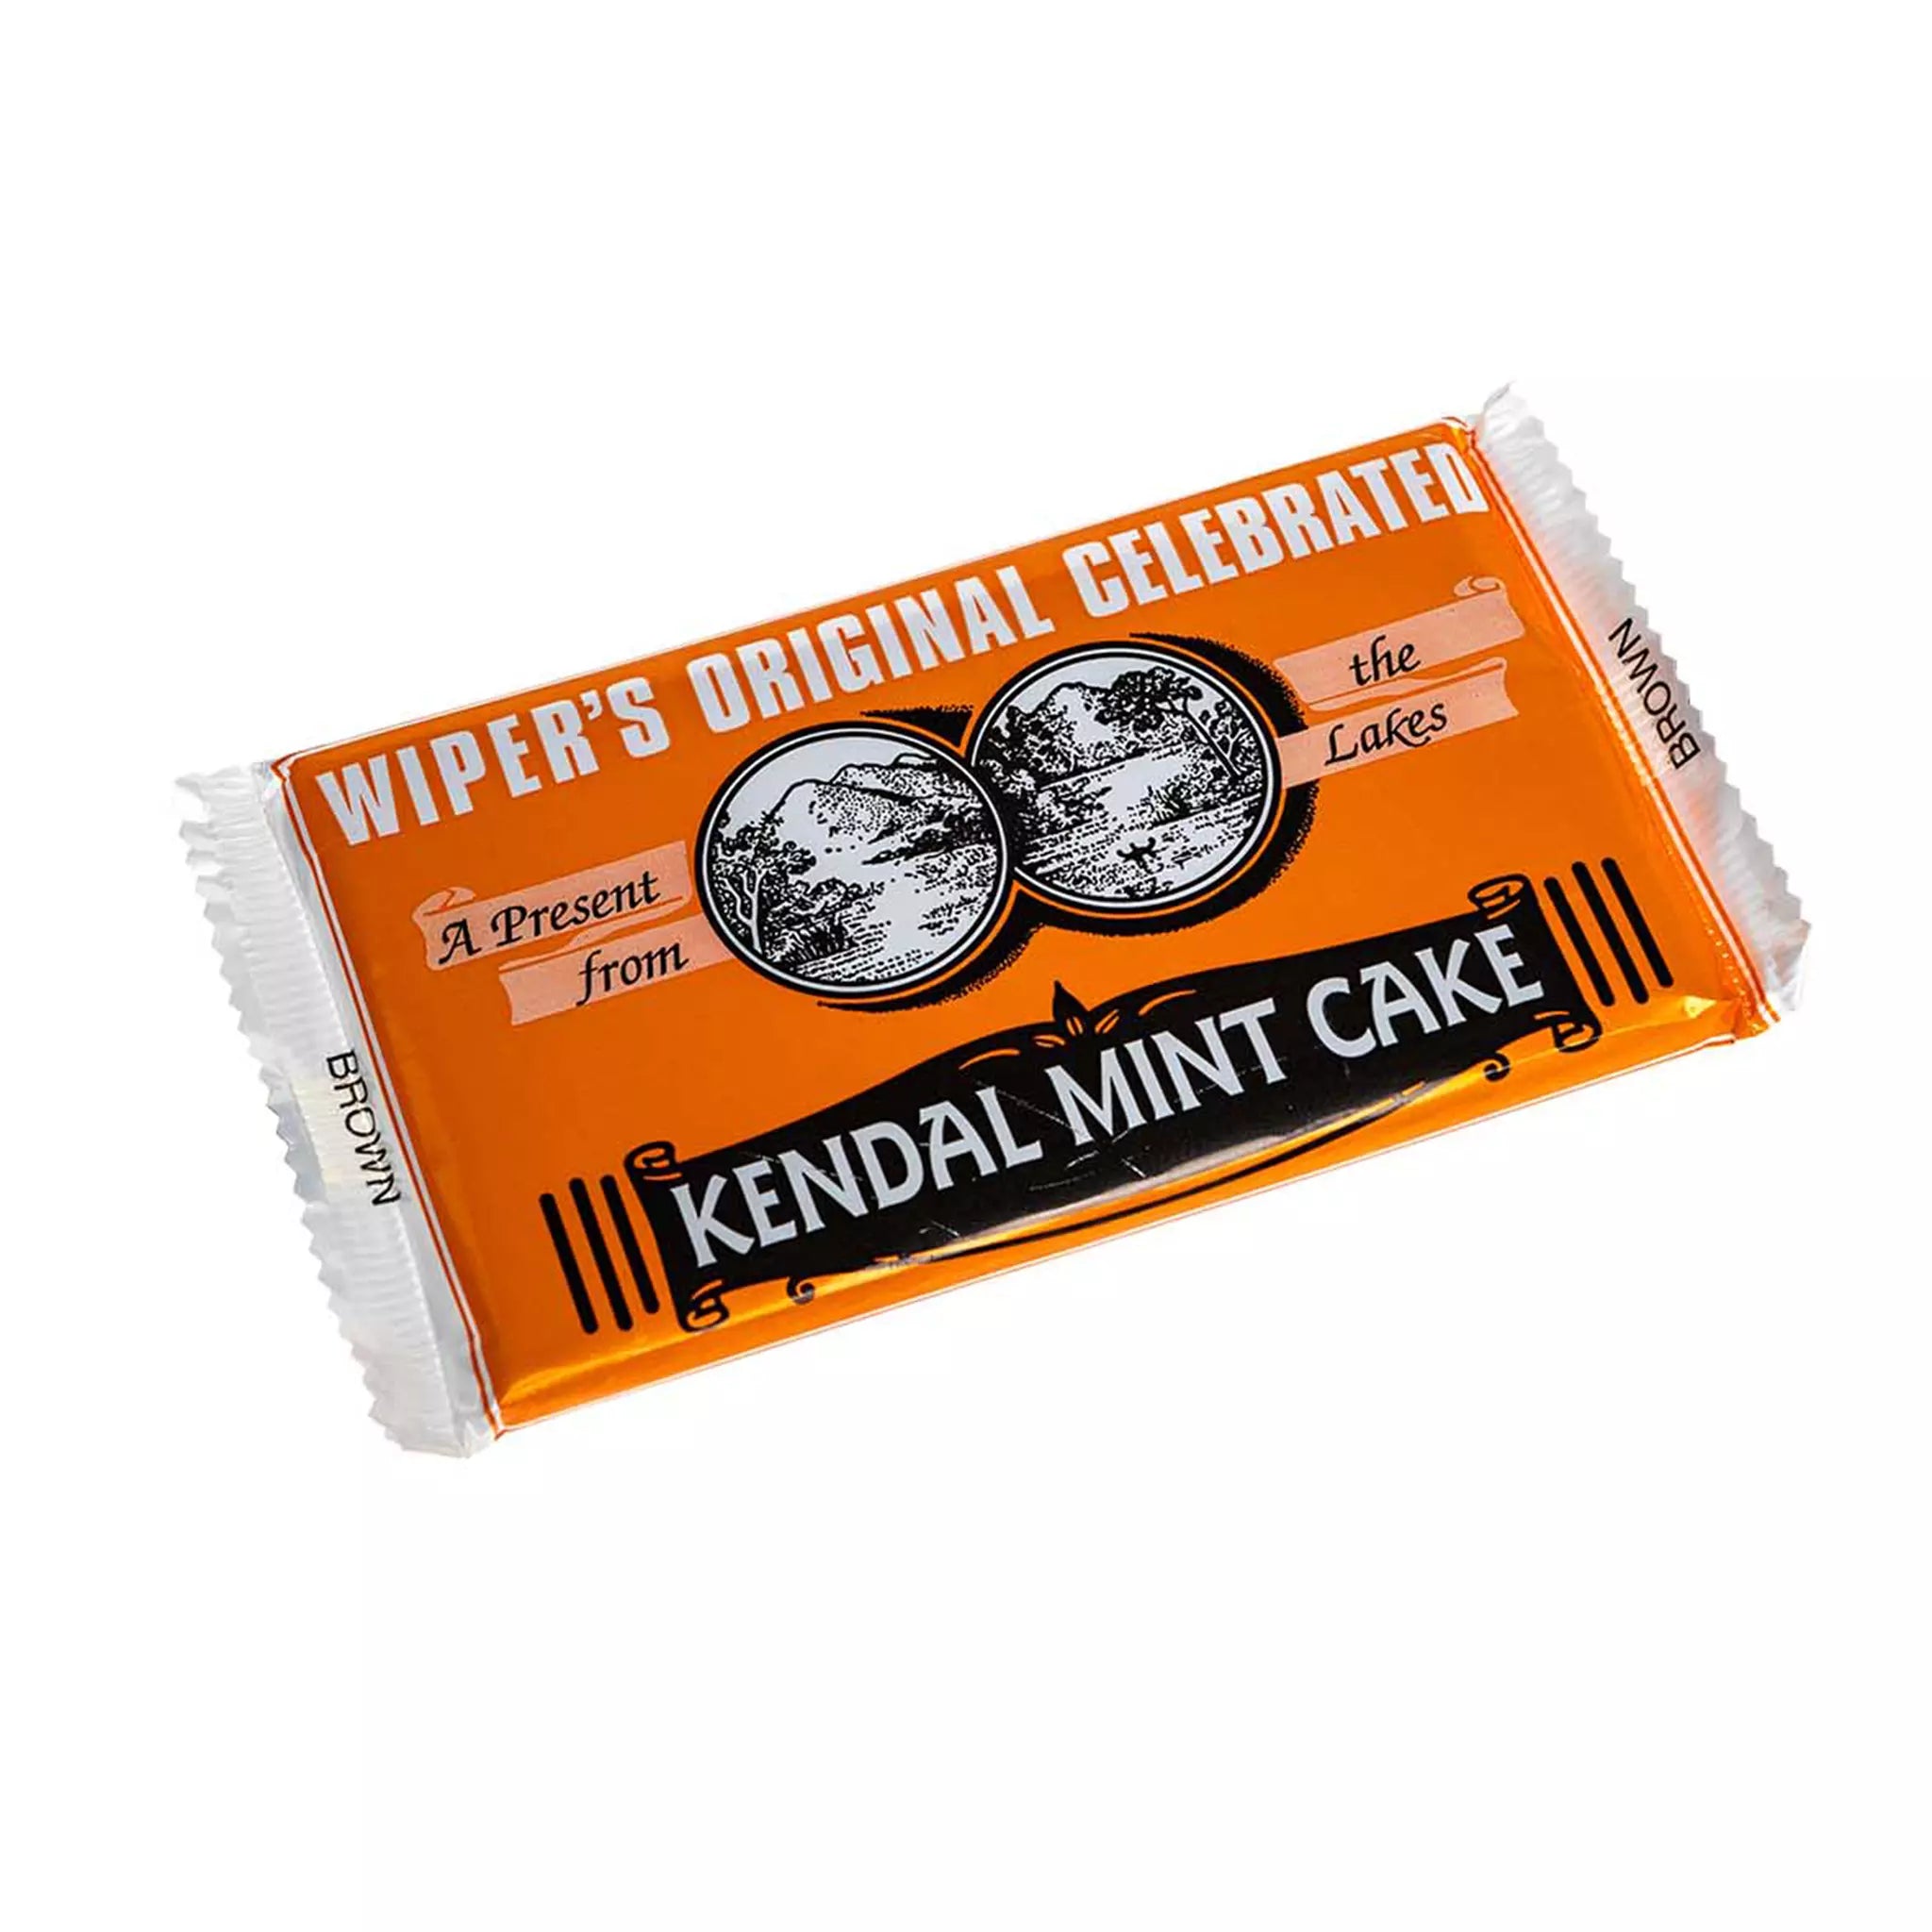 A wrapped bar of Brown Kendal Mint Cake. The wrapper is orange and features the words 'Wiper's original celebrated Kendal Mint Cake.